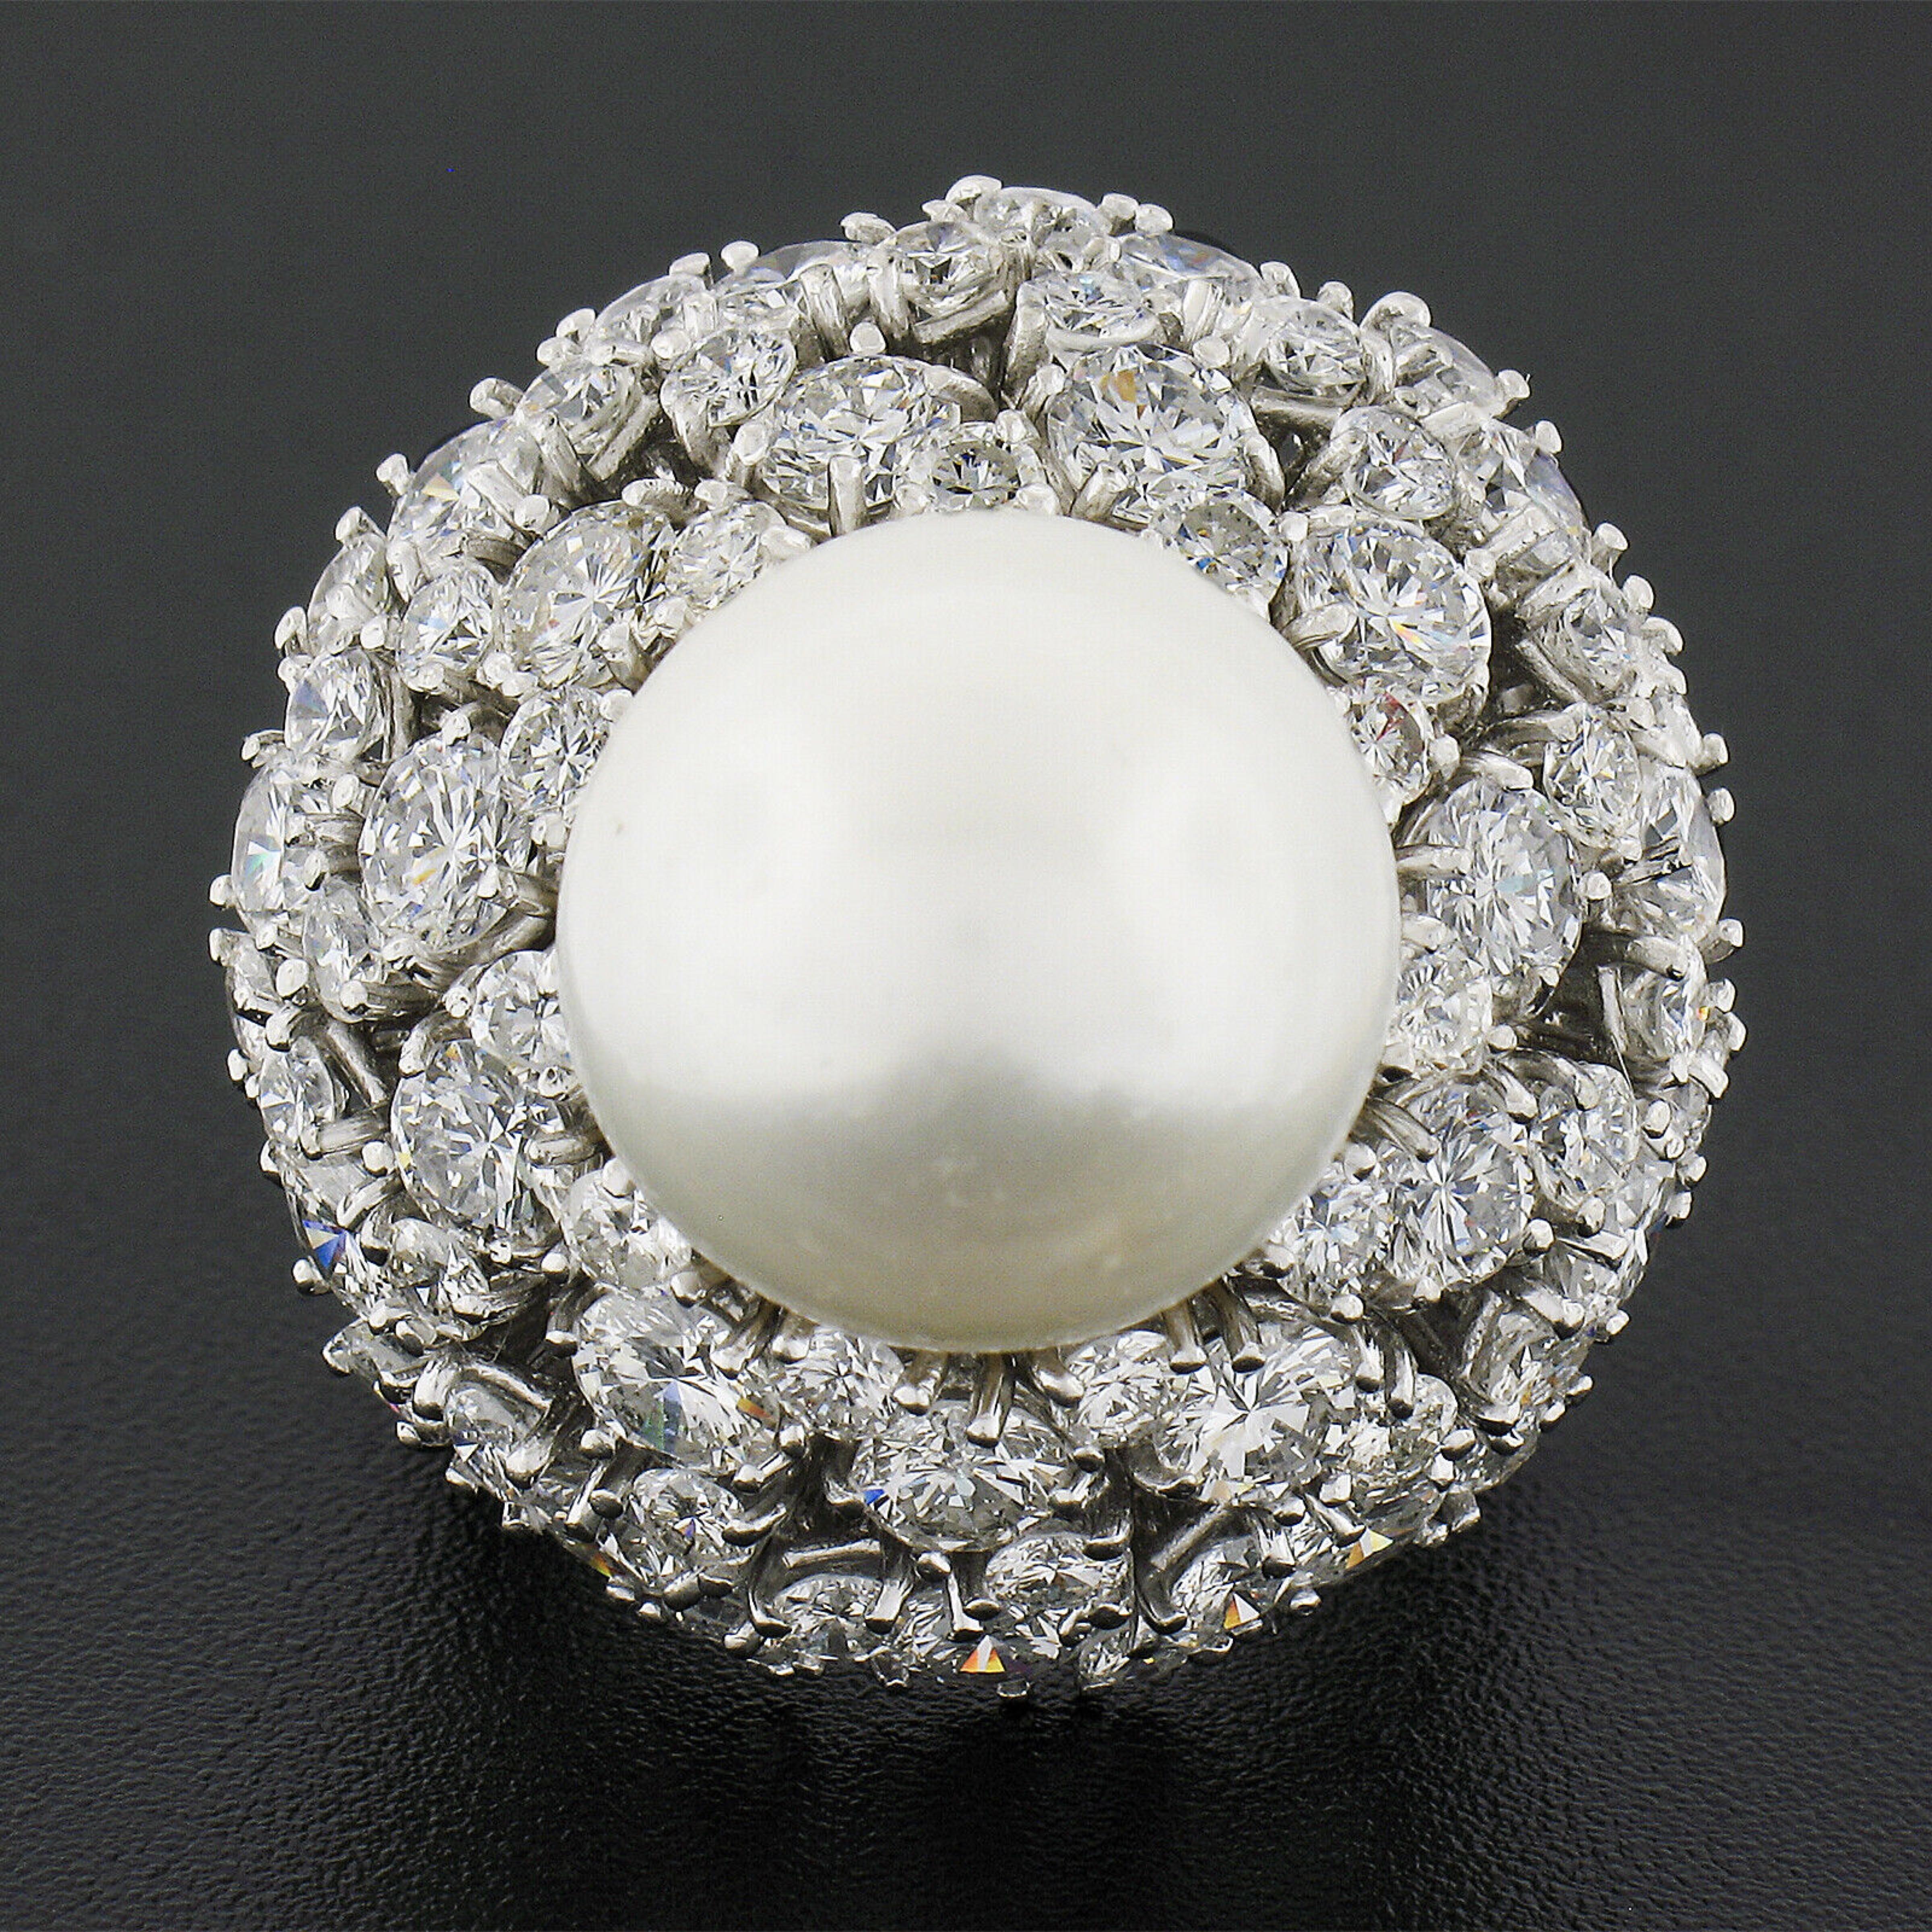 This absolutely magnificent and very well made midcentury cocktail ring was hand crafted from solid platinum and features an amazing, large, cultured pearl that is set above a sea of super fiery round brilliant cut diamonds. The incredible 14mm